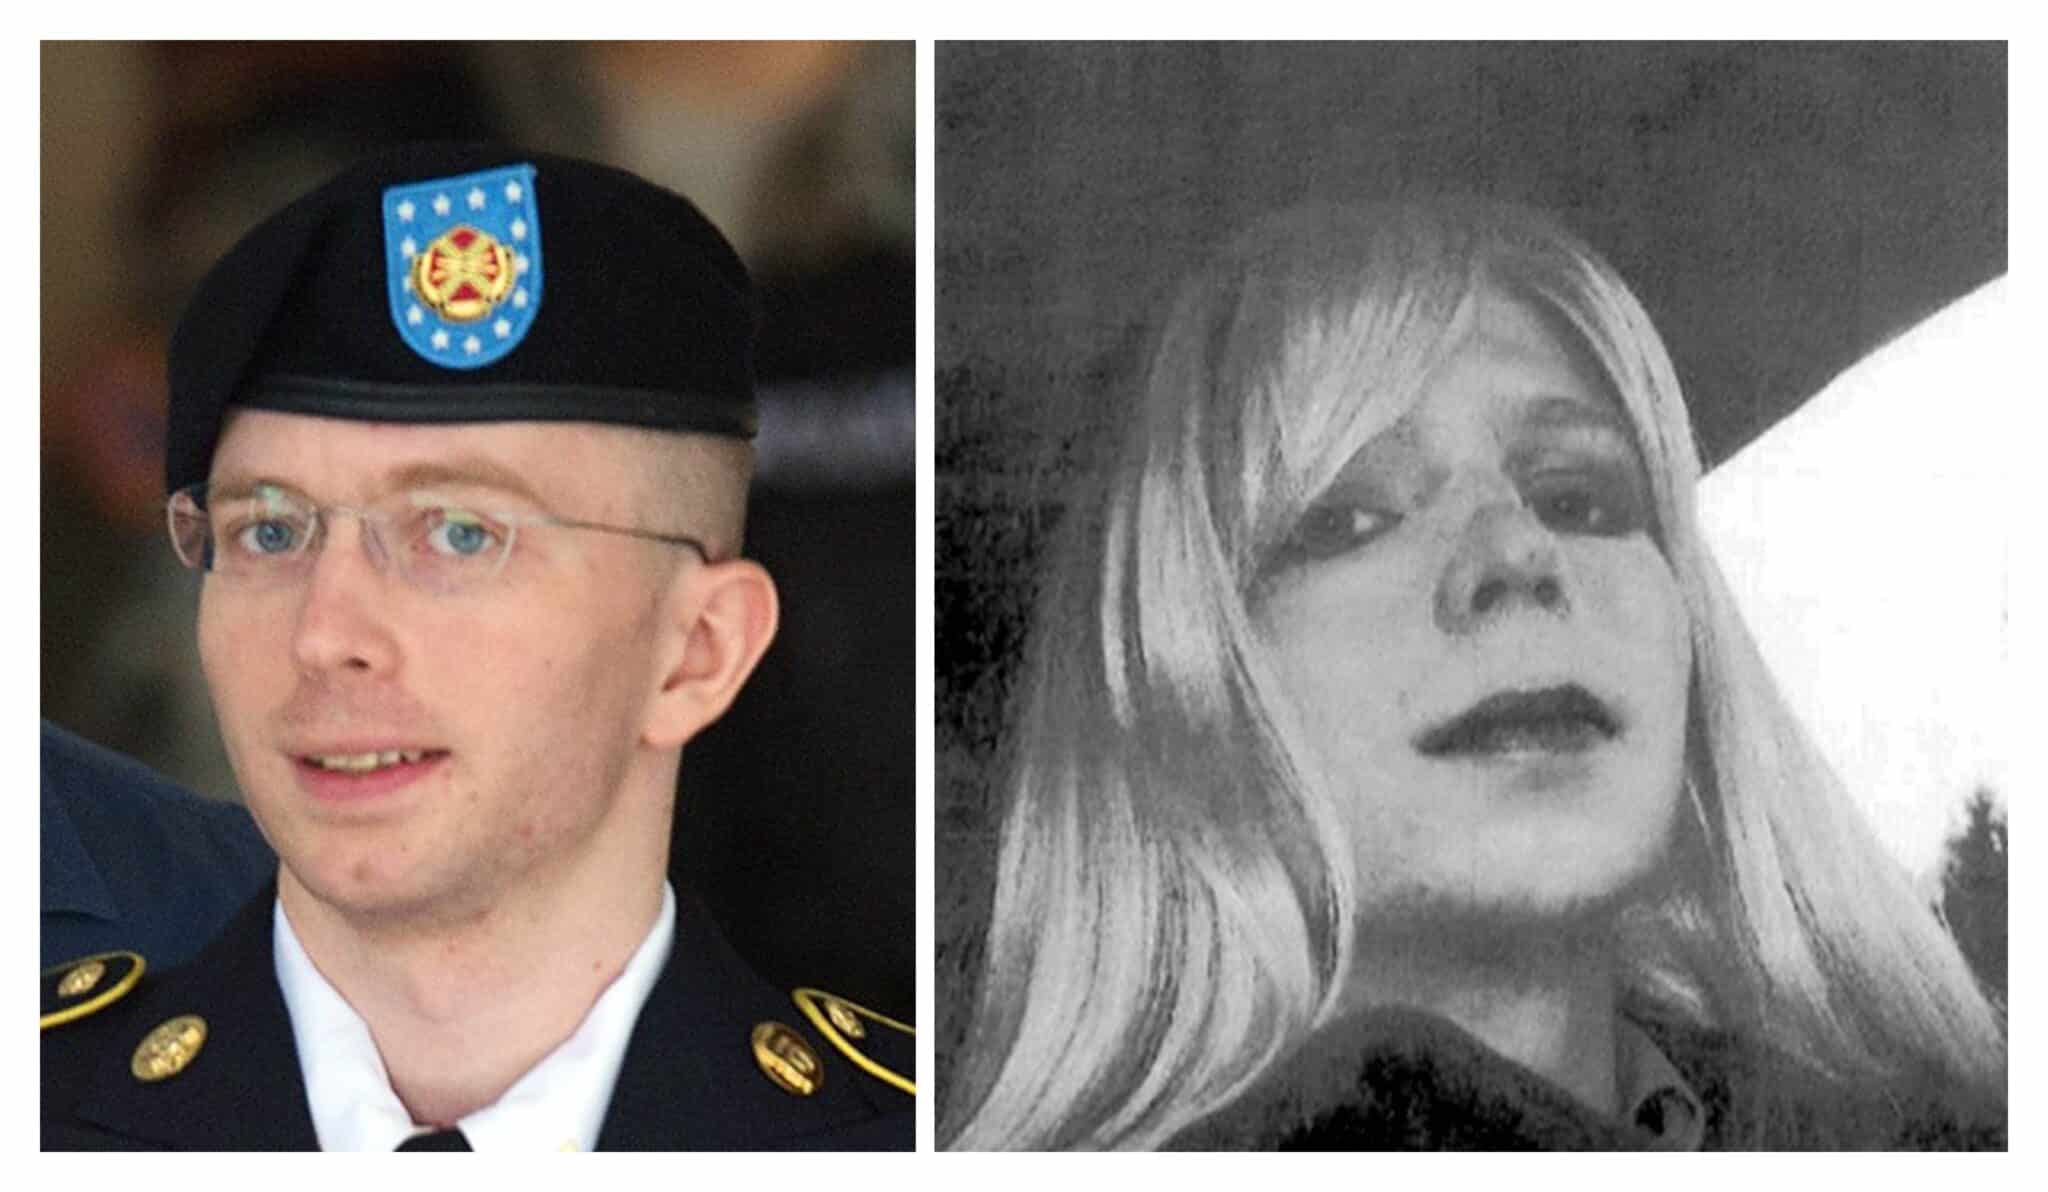 Breaking Chelsea Manning To Be First Transgender To Run For Congress